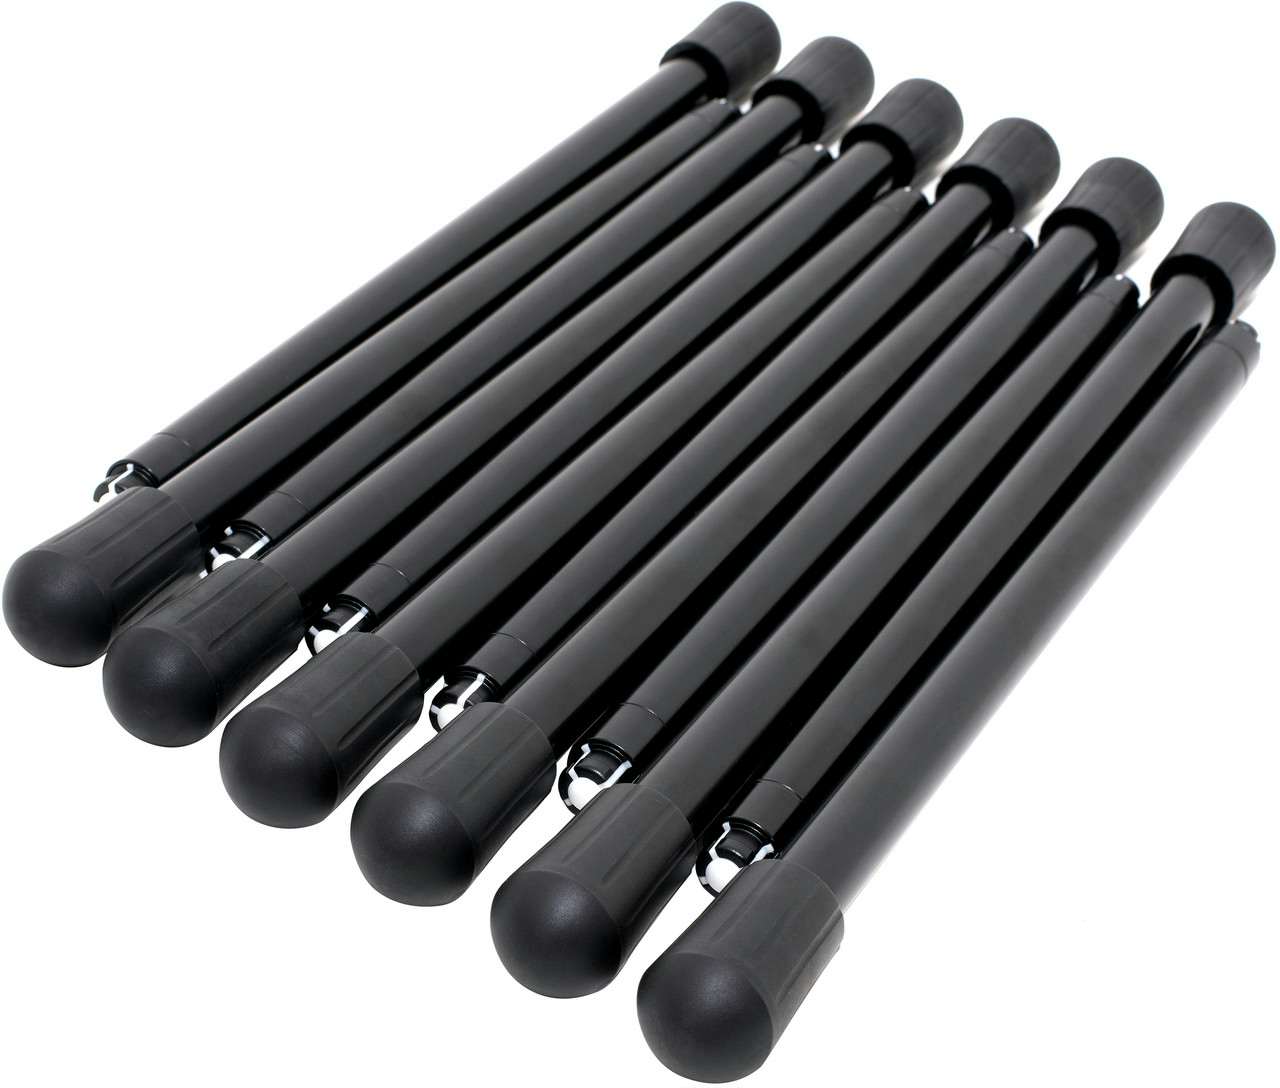 Cot One Convertible Legs (12 Pack) Black